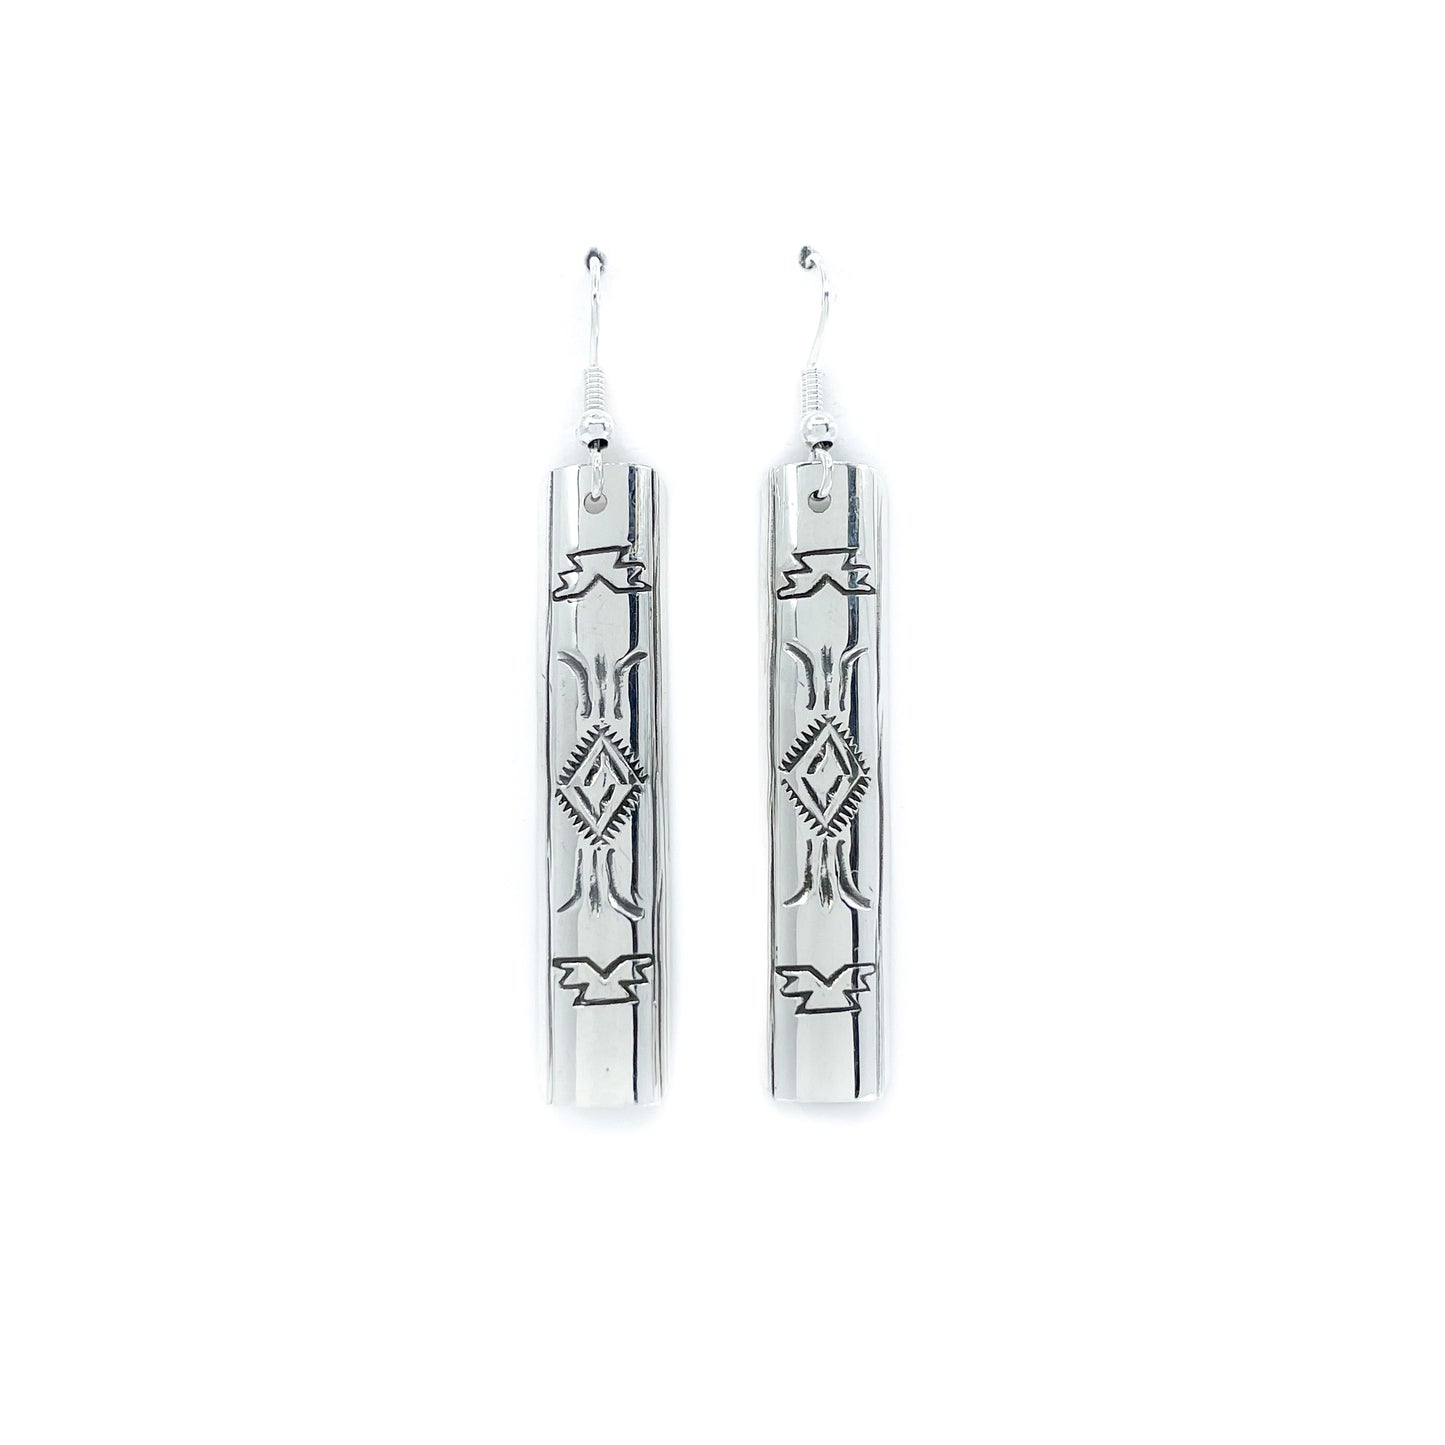 Traditional Stamped Design Elements - Silver Earrings